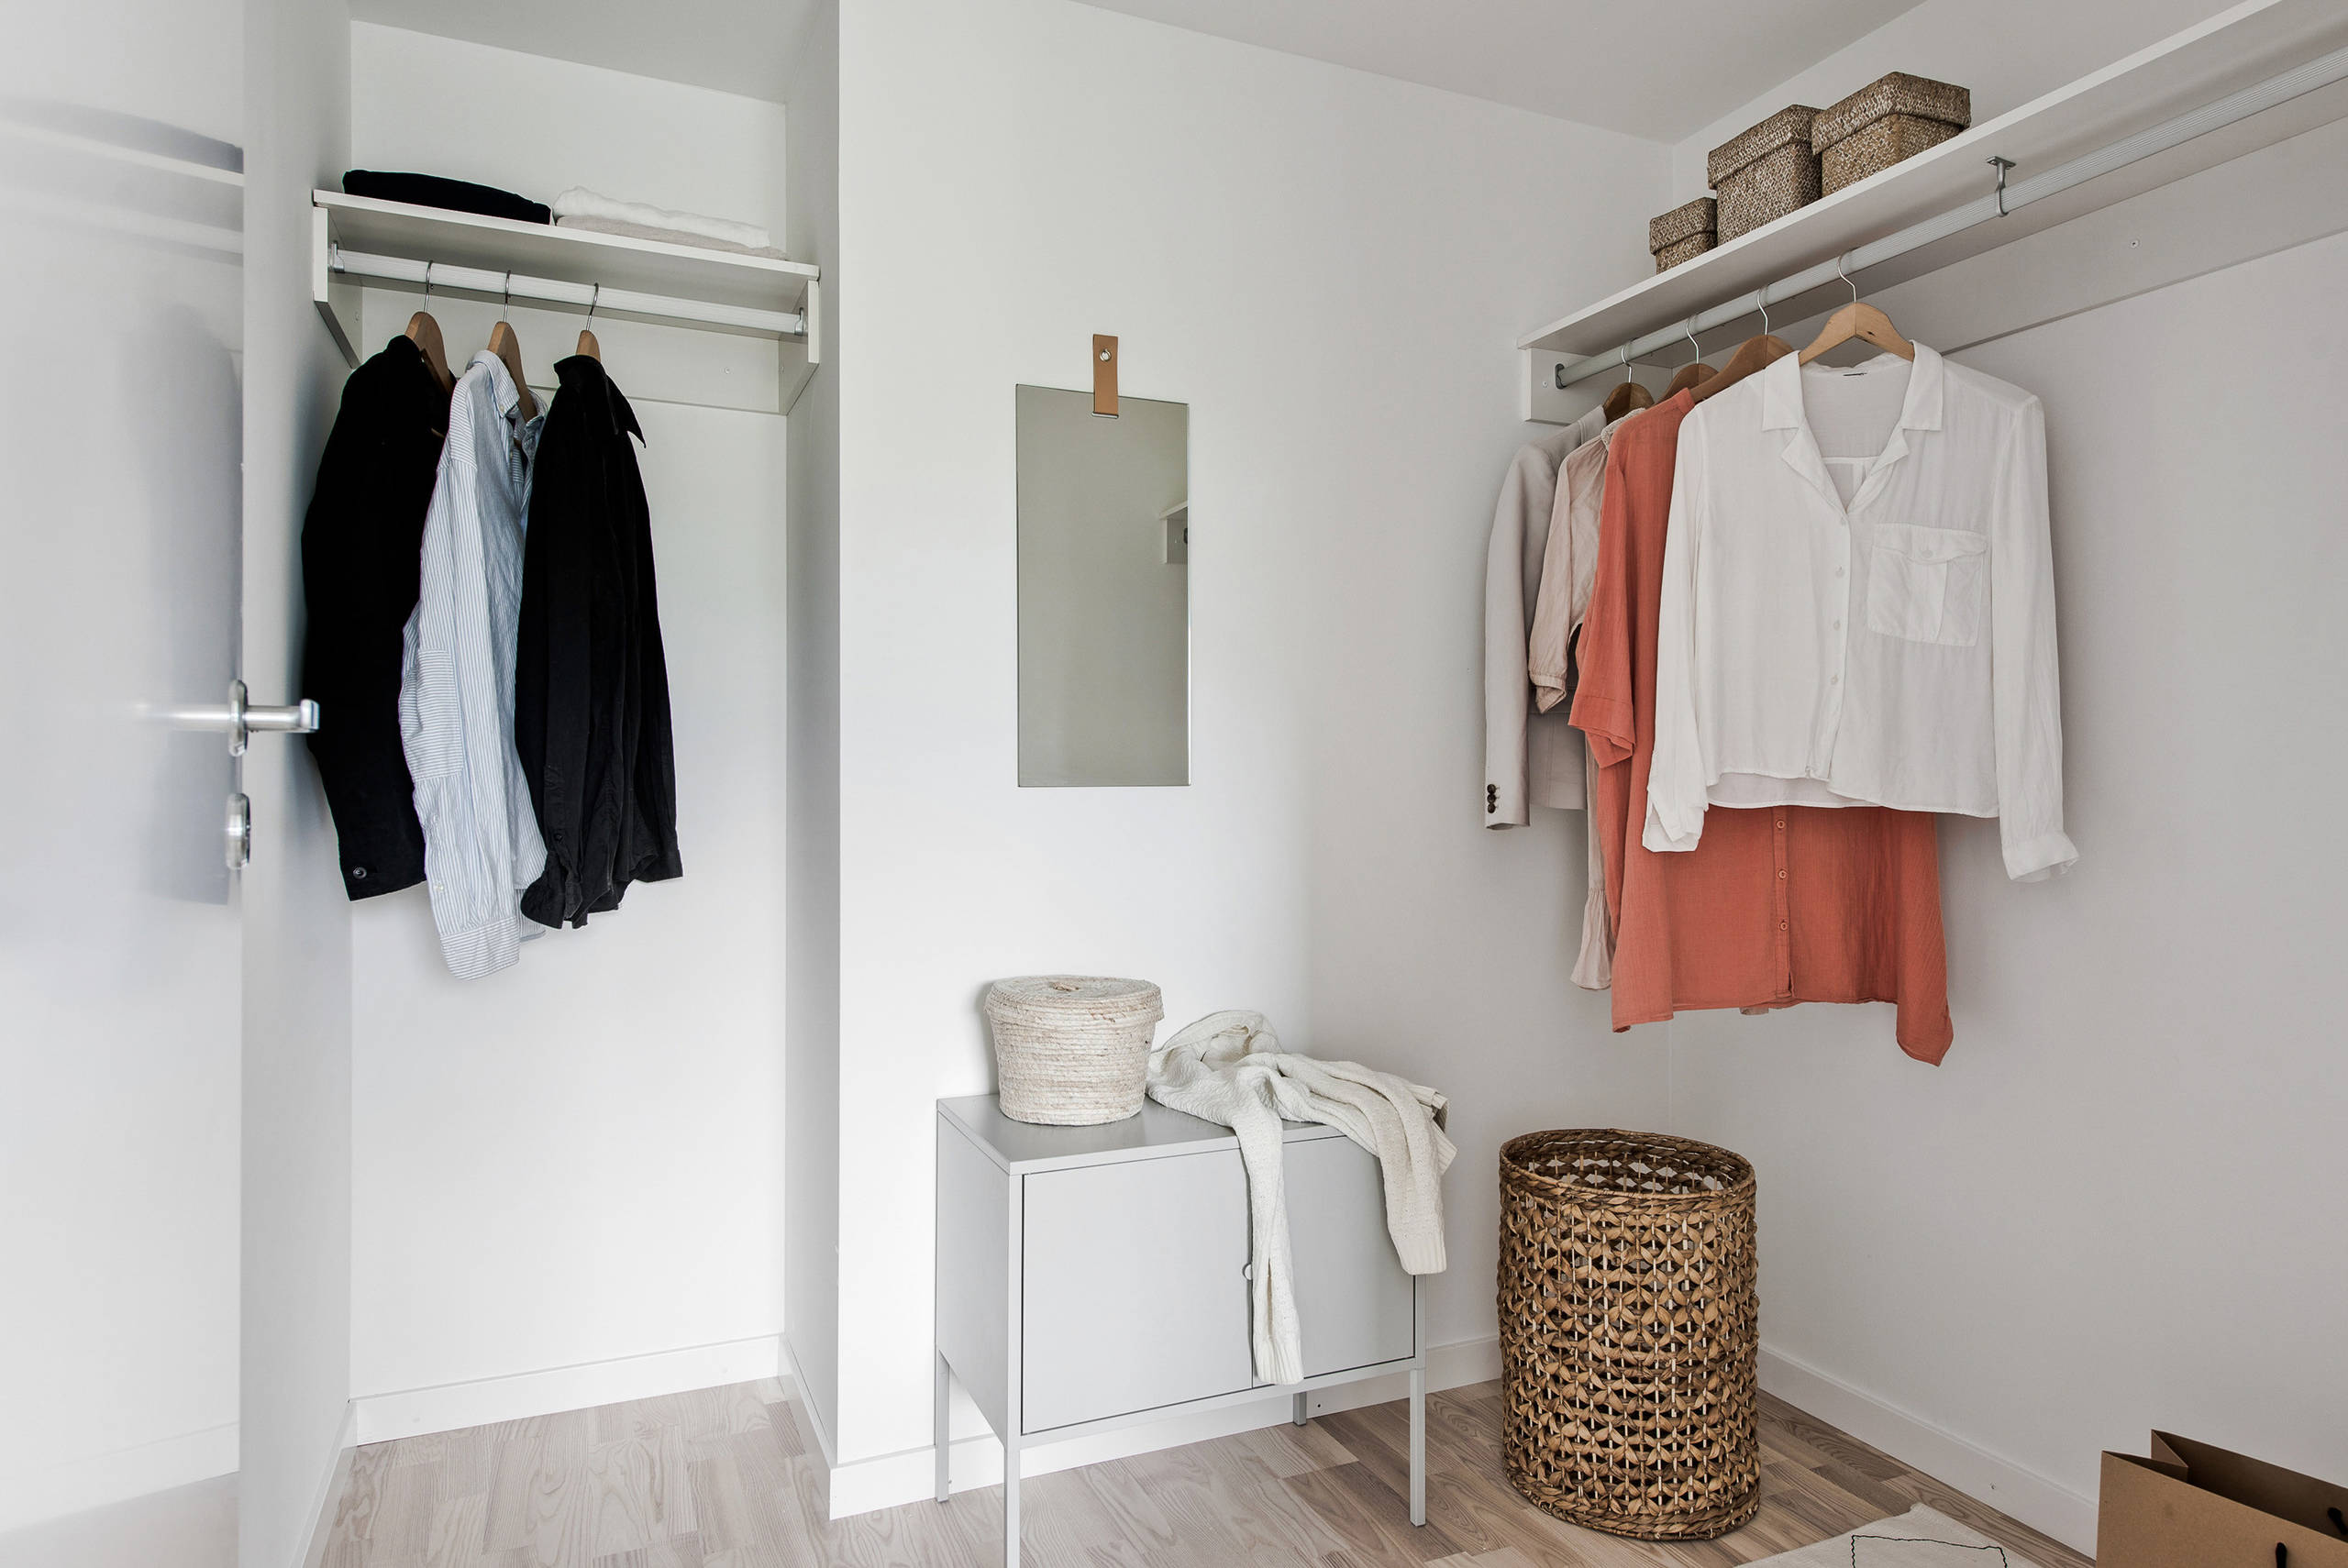 18 Charming Scandi-style Closet Designs You Will Love